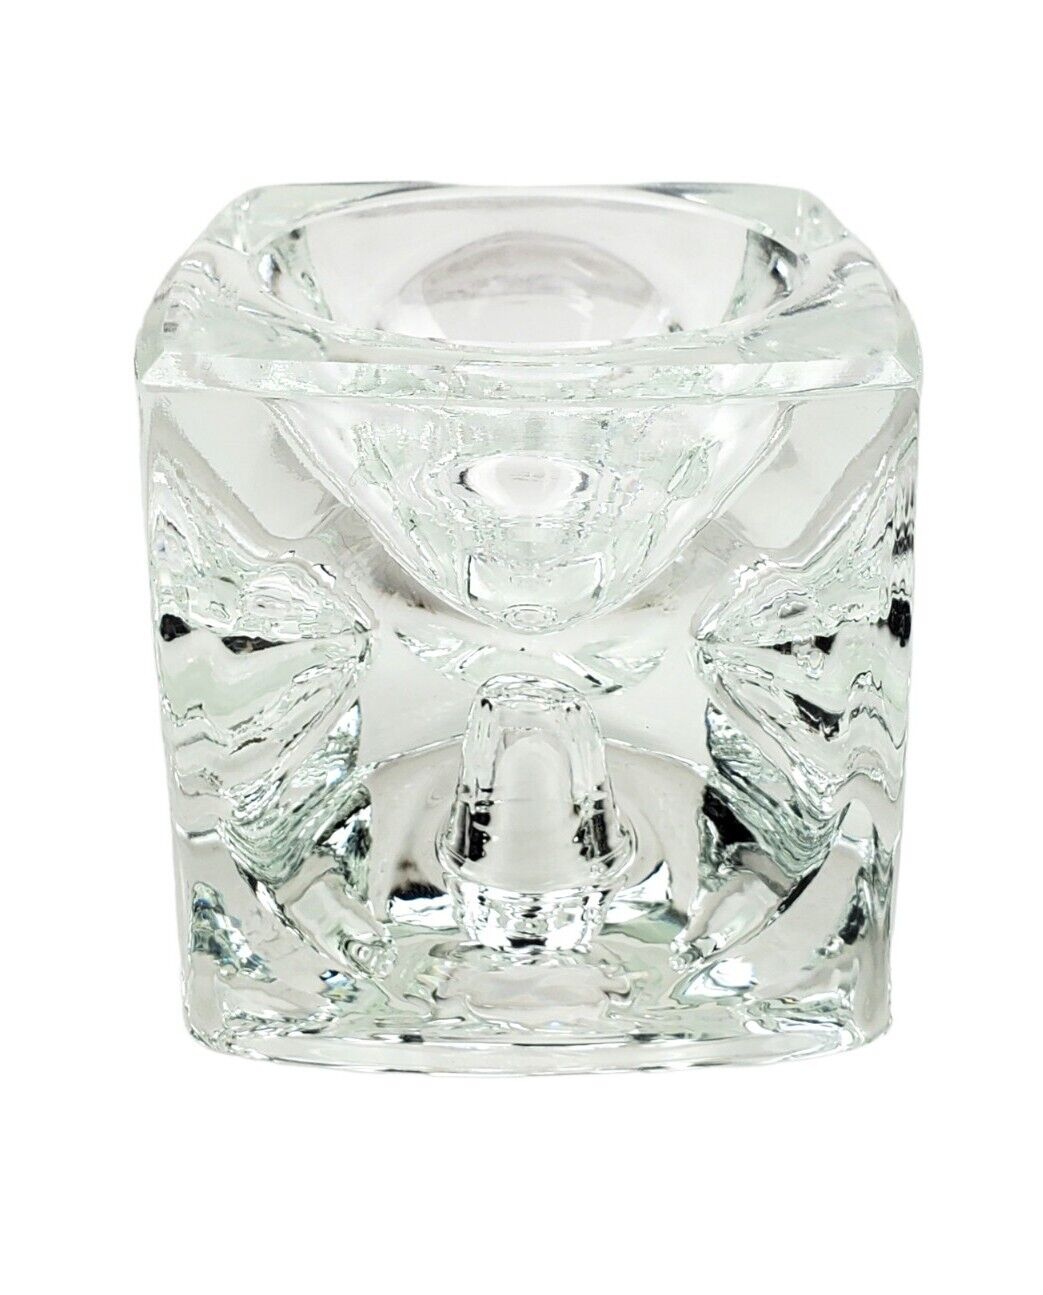 2 Reversible Ice Cube Clear Glass Block Candlestick Votive Candle Holders Decor